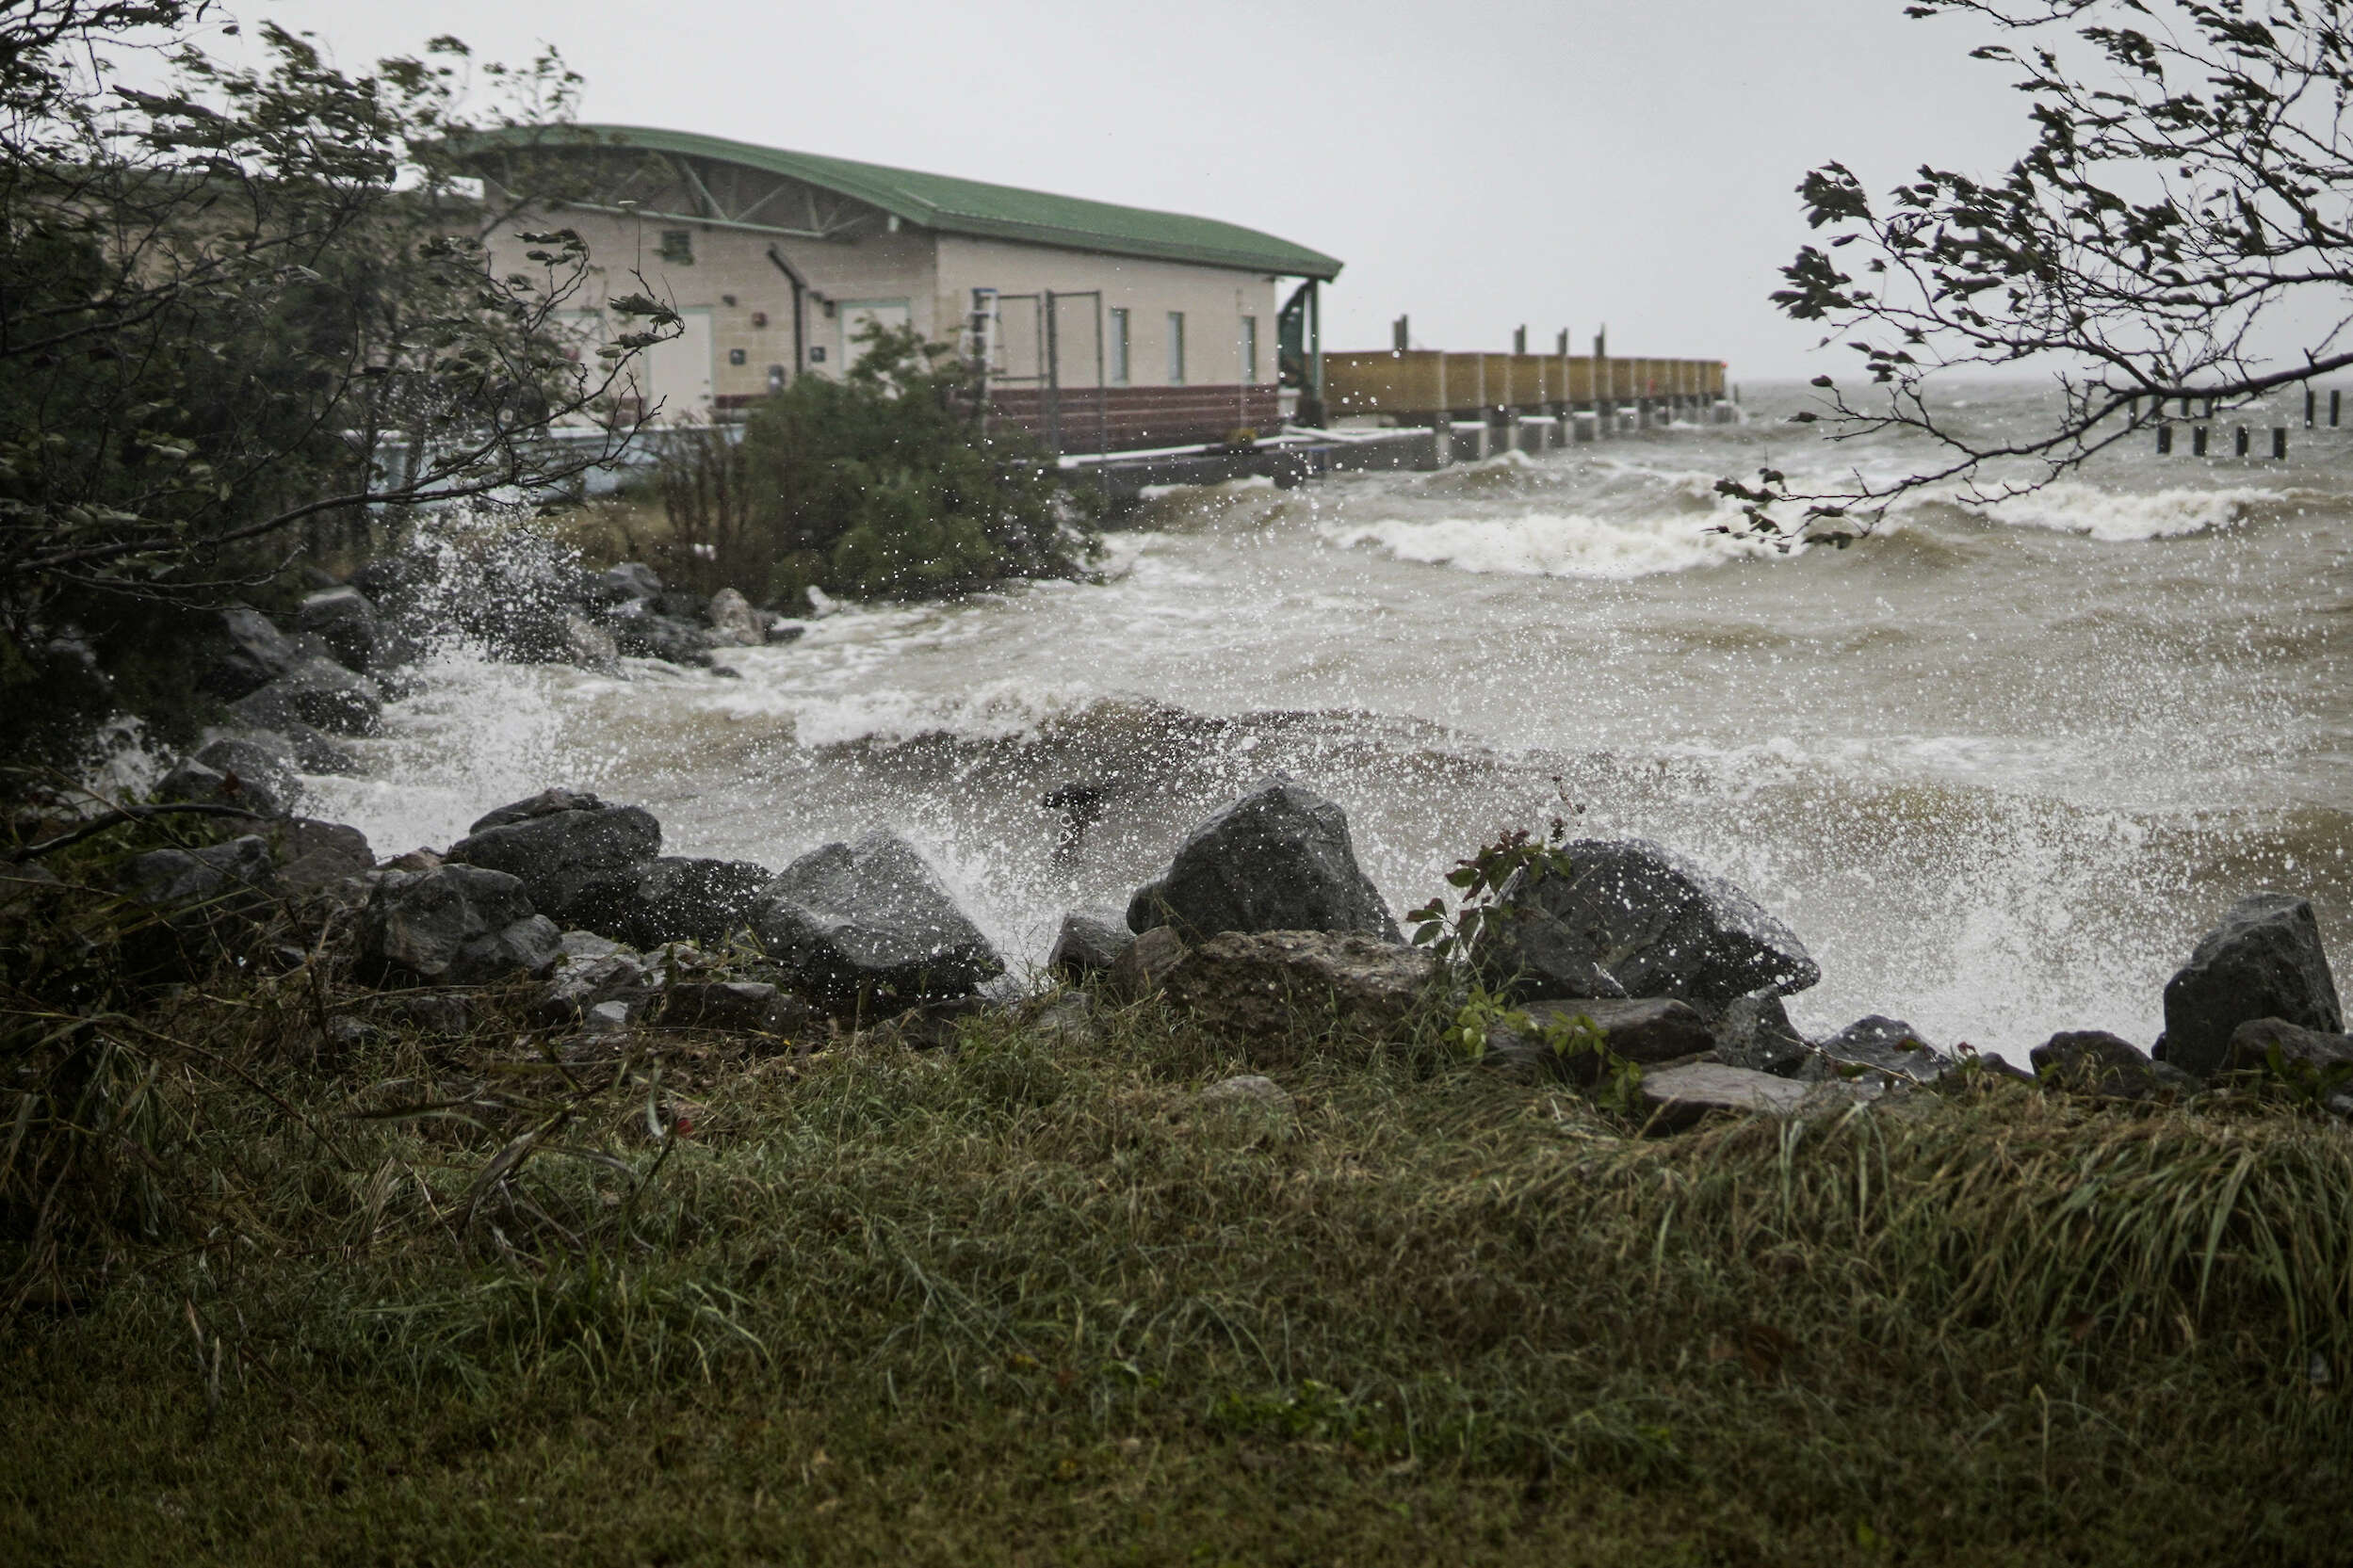 Murky Choptank River waves crash against a rocky shoreline with part of the oyster hatchery building to the side.